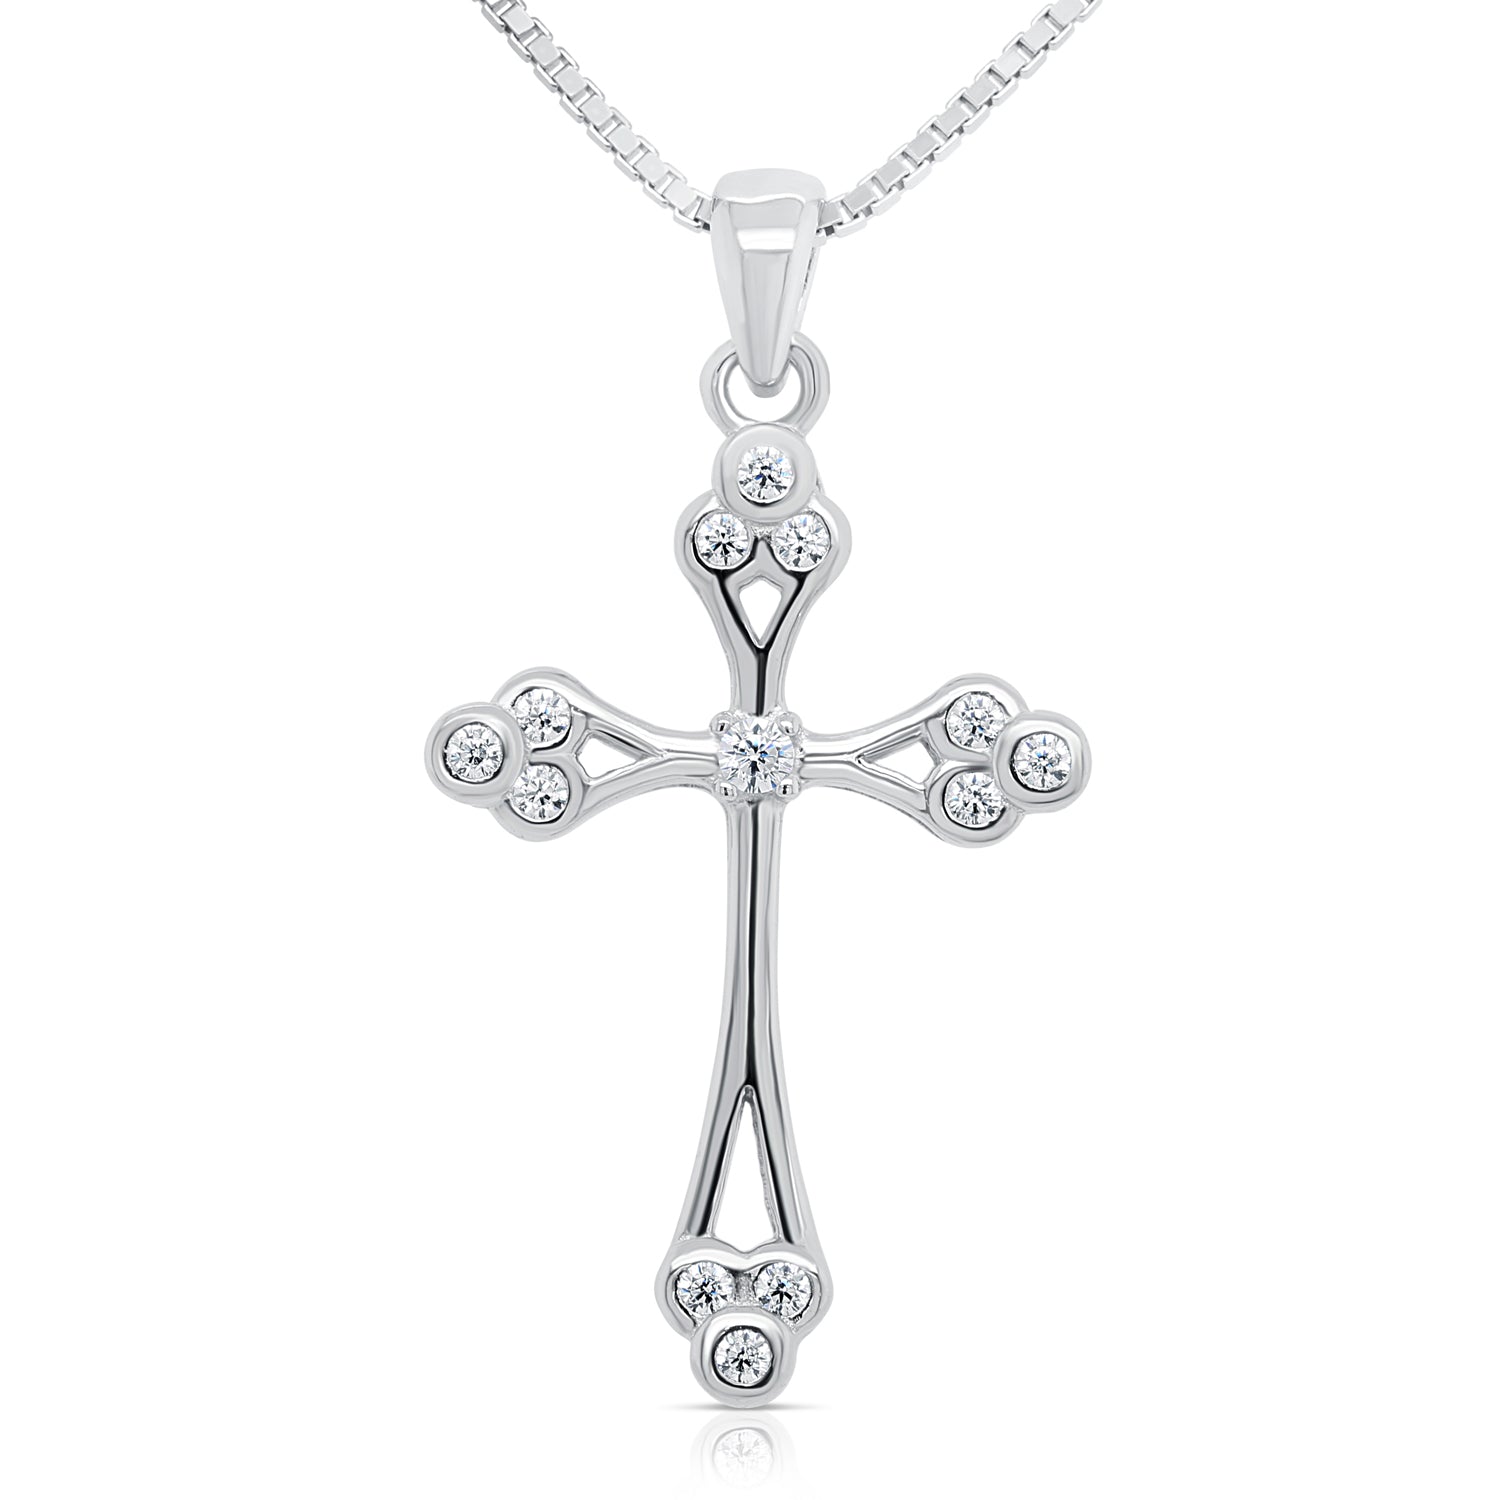 CZ Budded Cross Charm Necklace in Sterling Silver